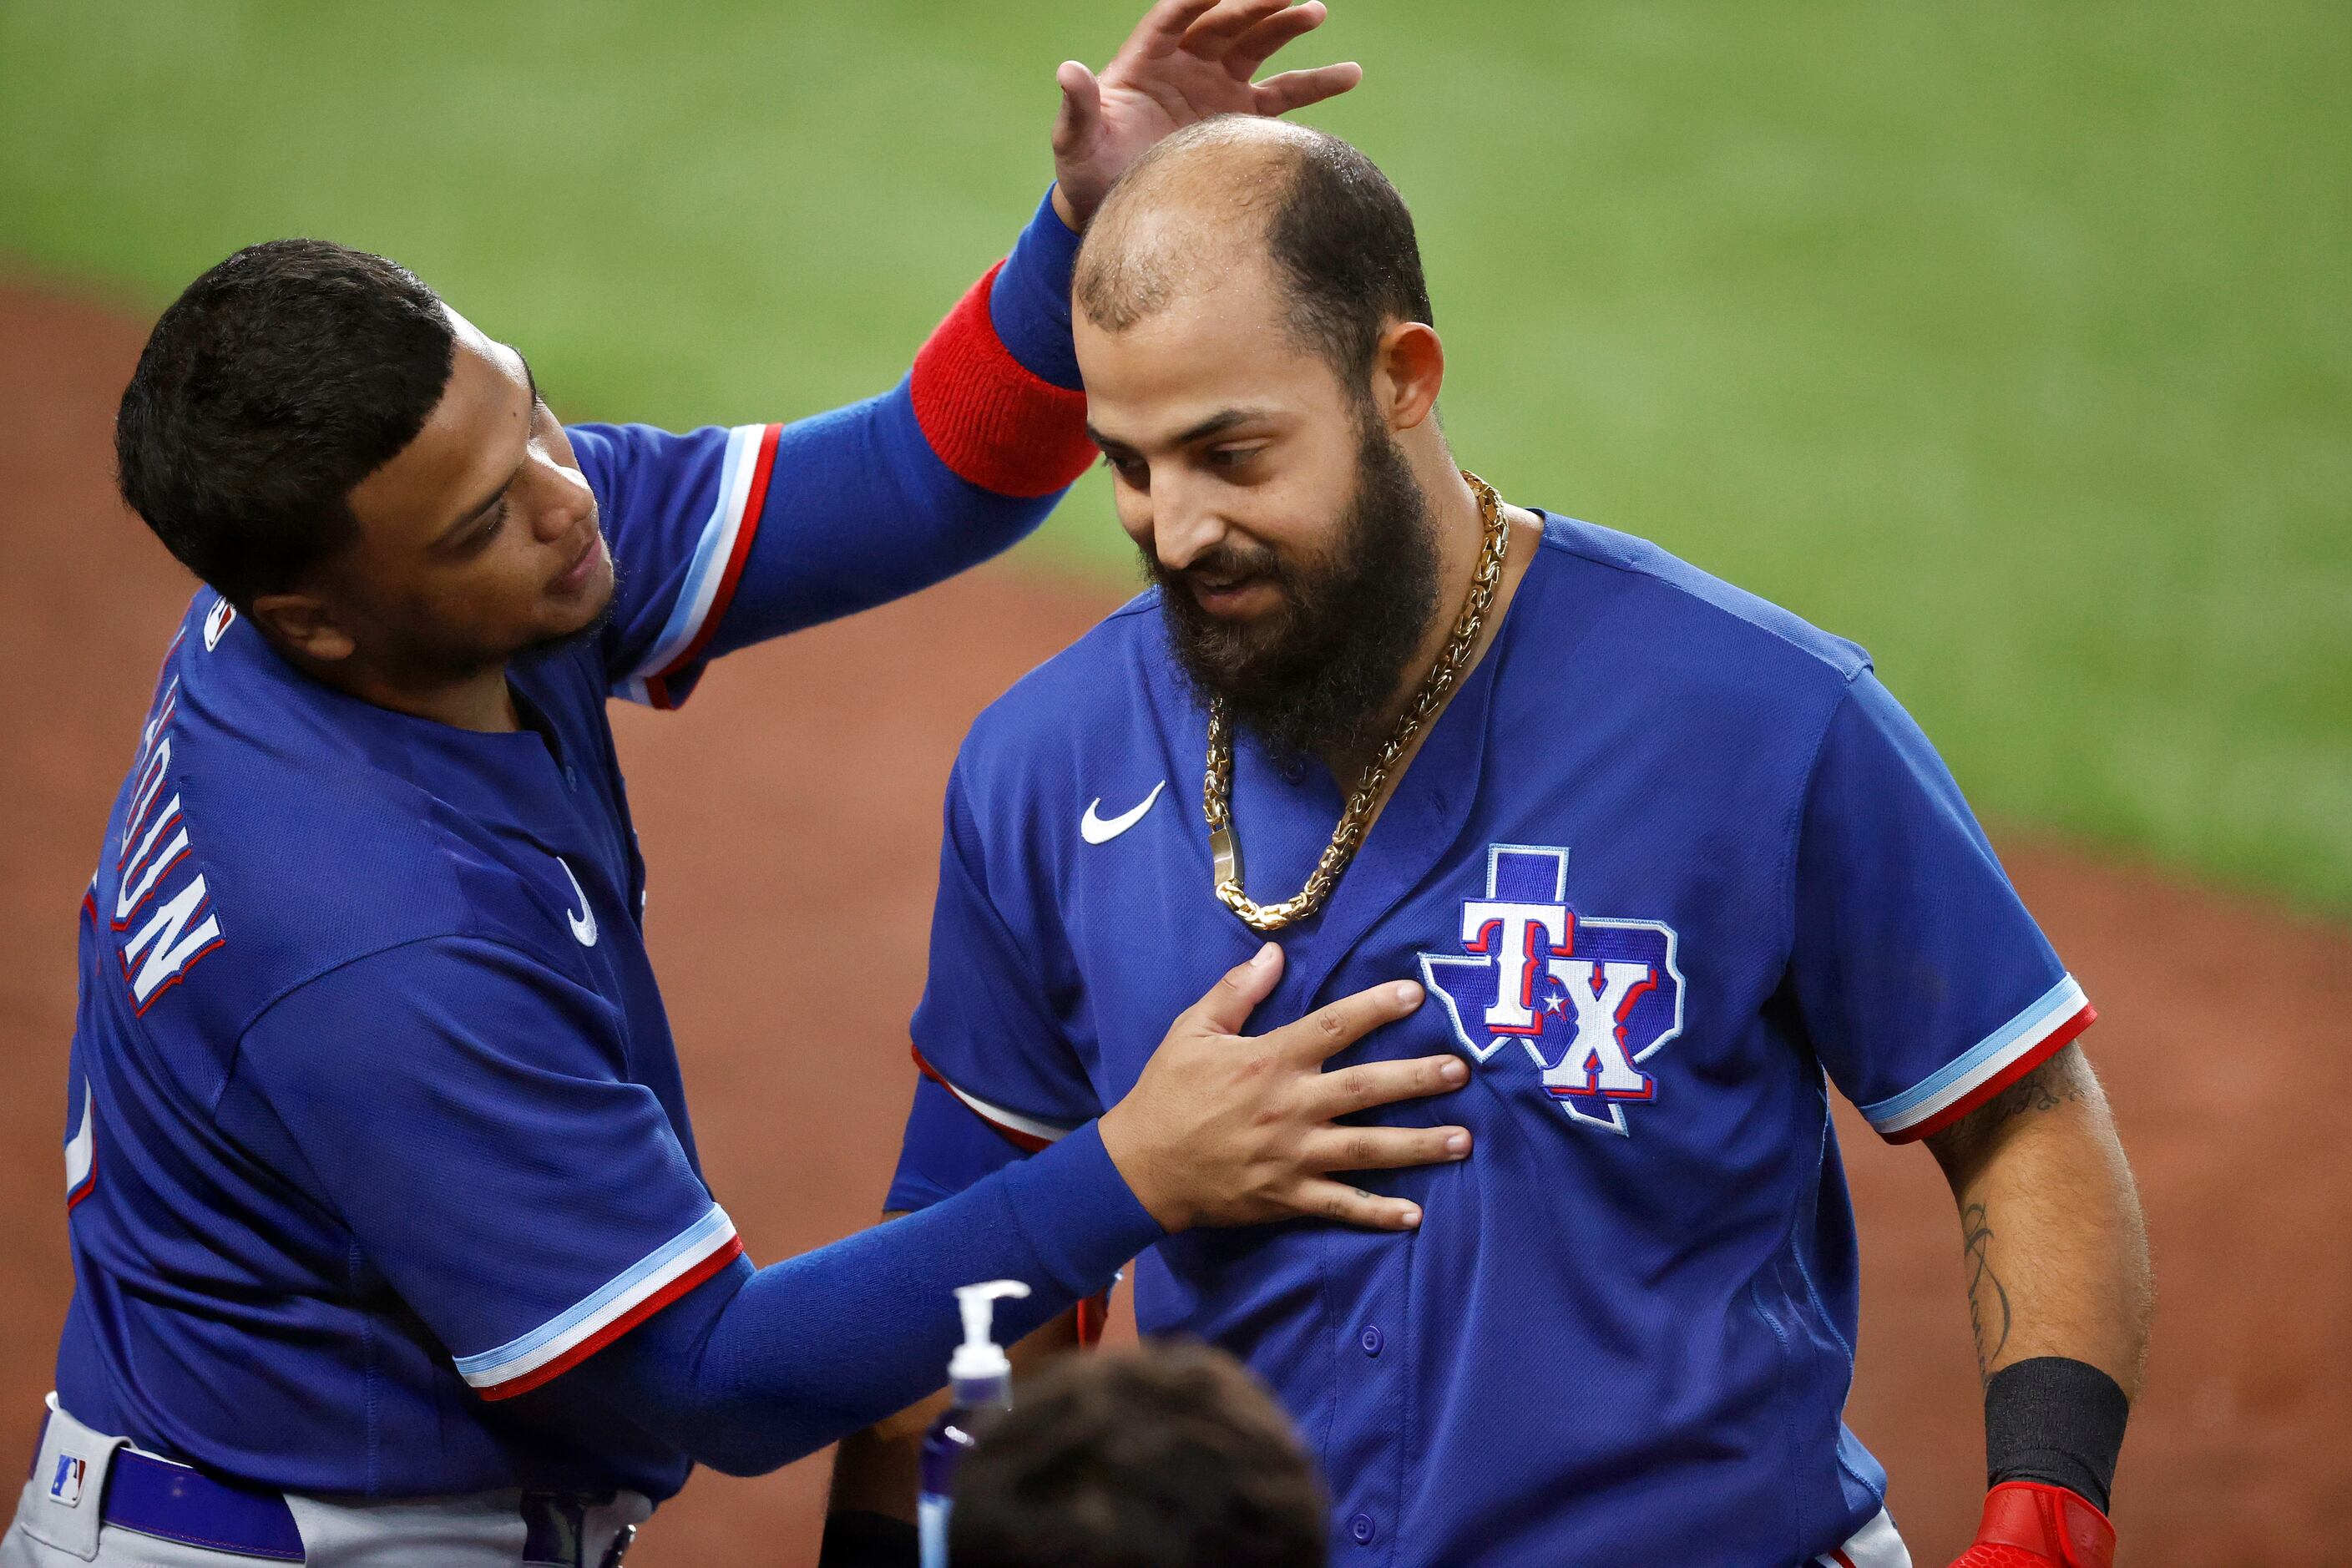 Texas Rangers Rougned Odor (right) is congratulated on his home run by teammate Willie...